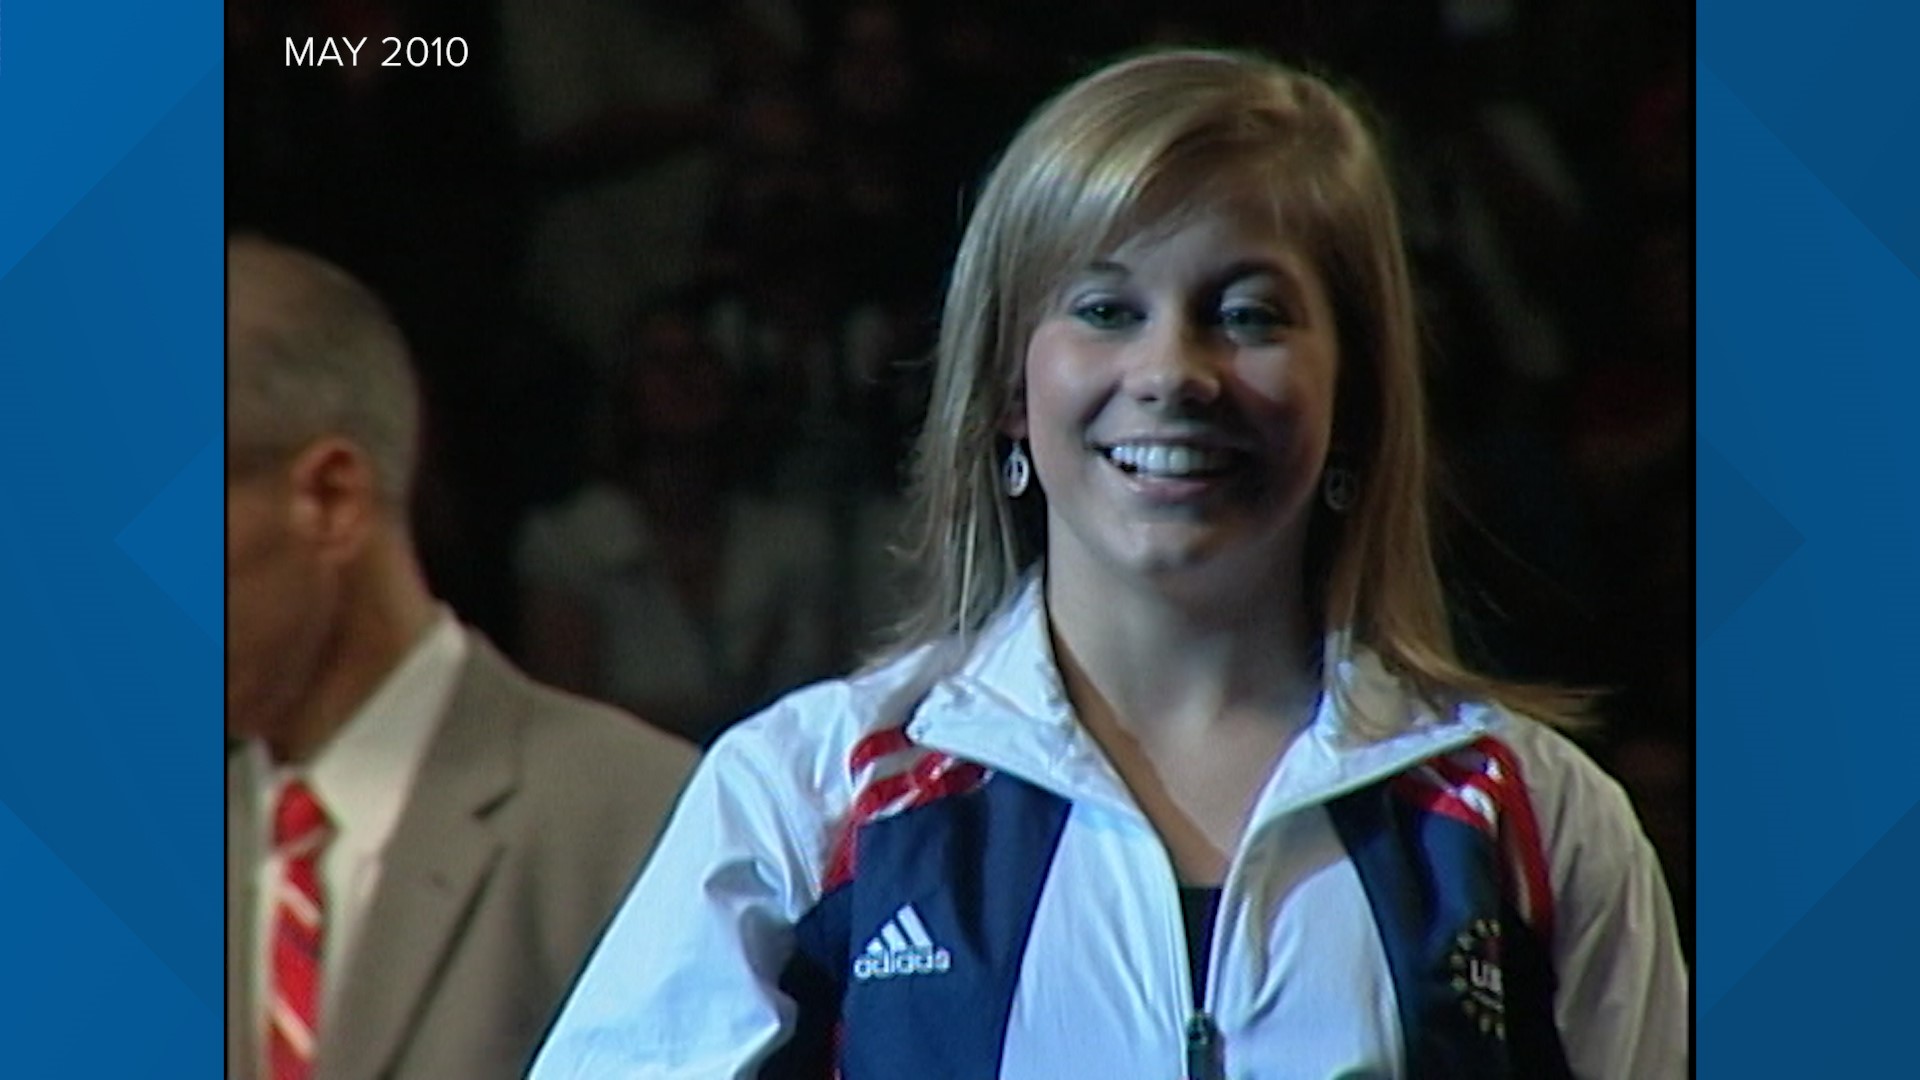 After medaling at the 2008 Beijing Olympic games followed by knee surgery in 2010, Iowa native Shawn Johnson announced her goal to return to the Olympics.